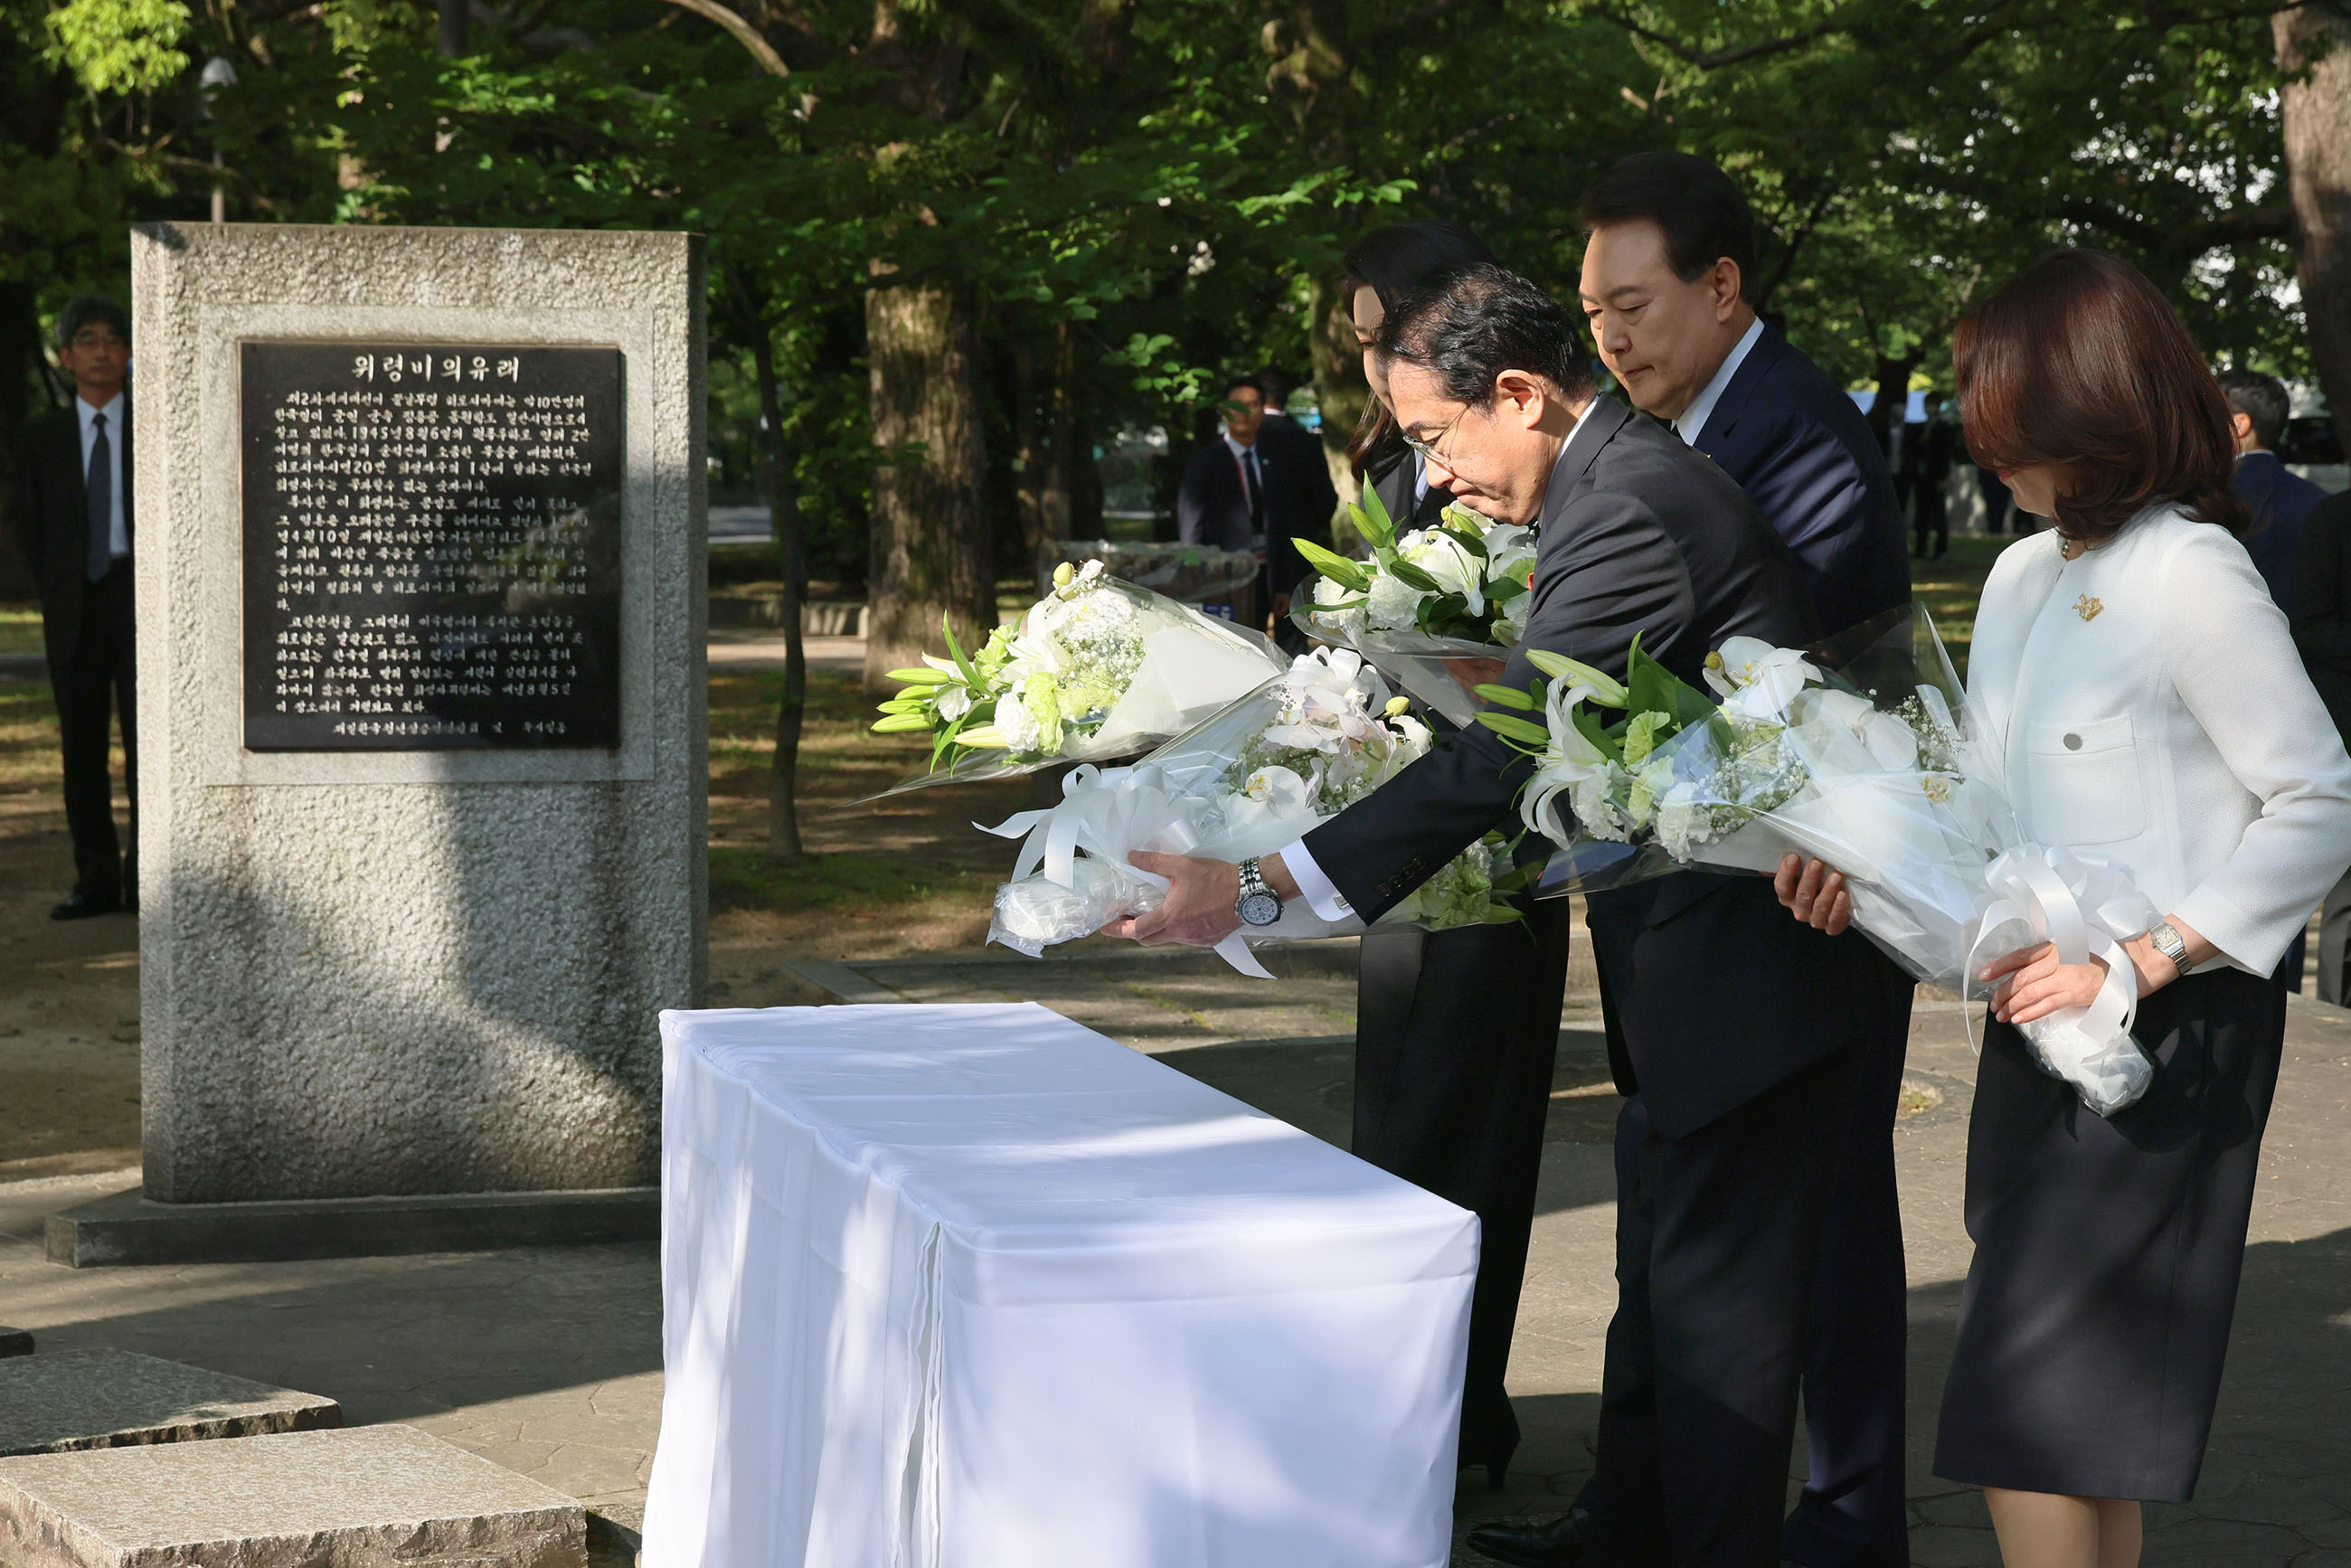 Prime Minister Kishida laying flowers at the Cenotaph for the ROK Atomic Bomb Victims (2)